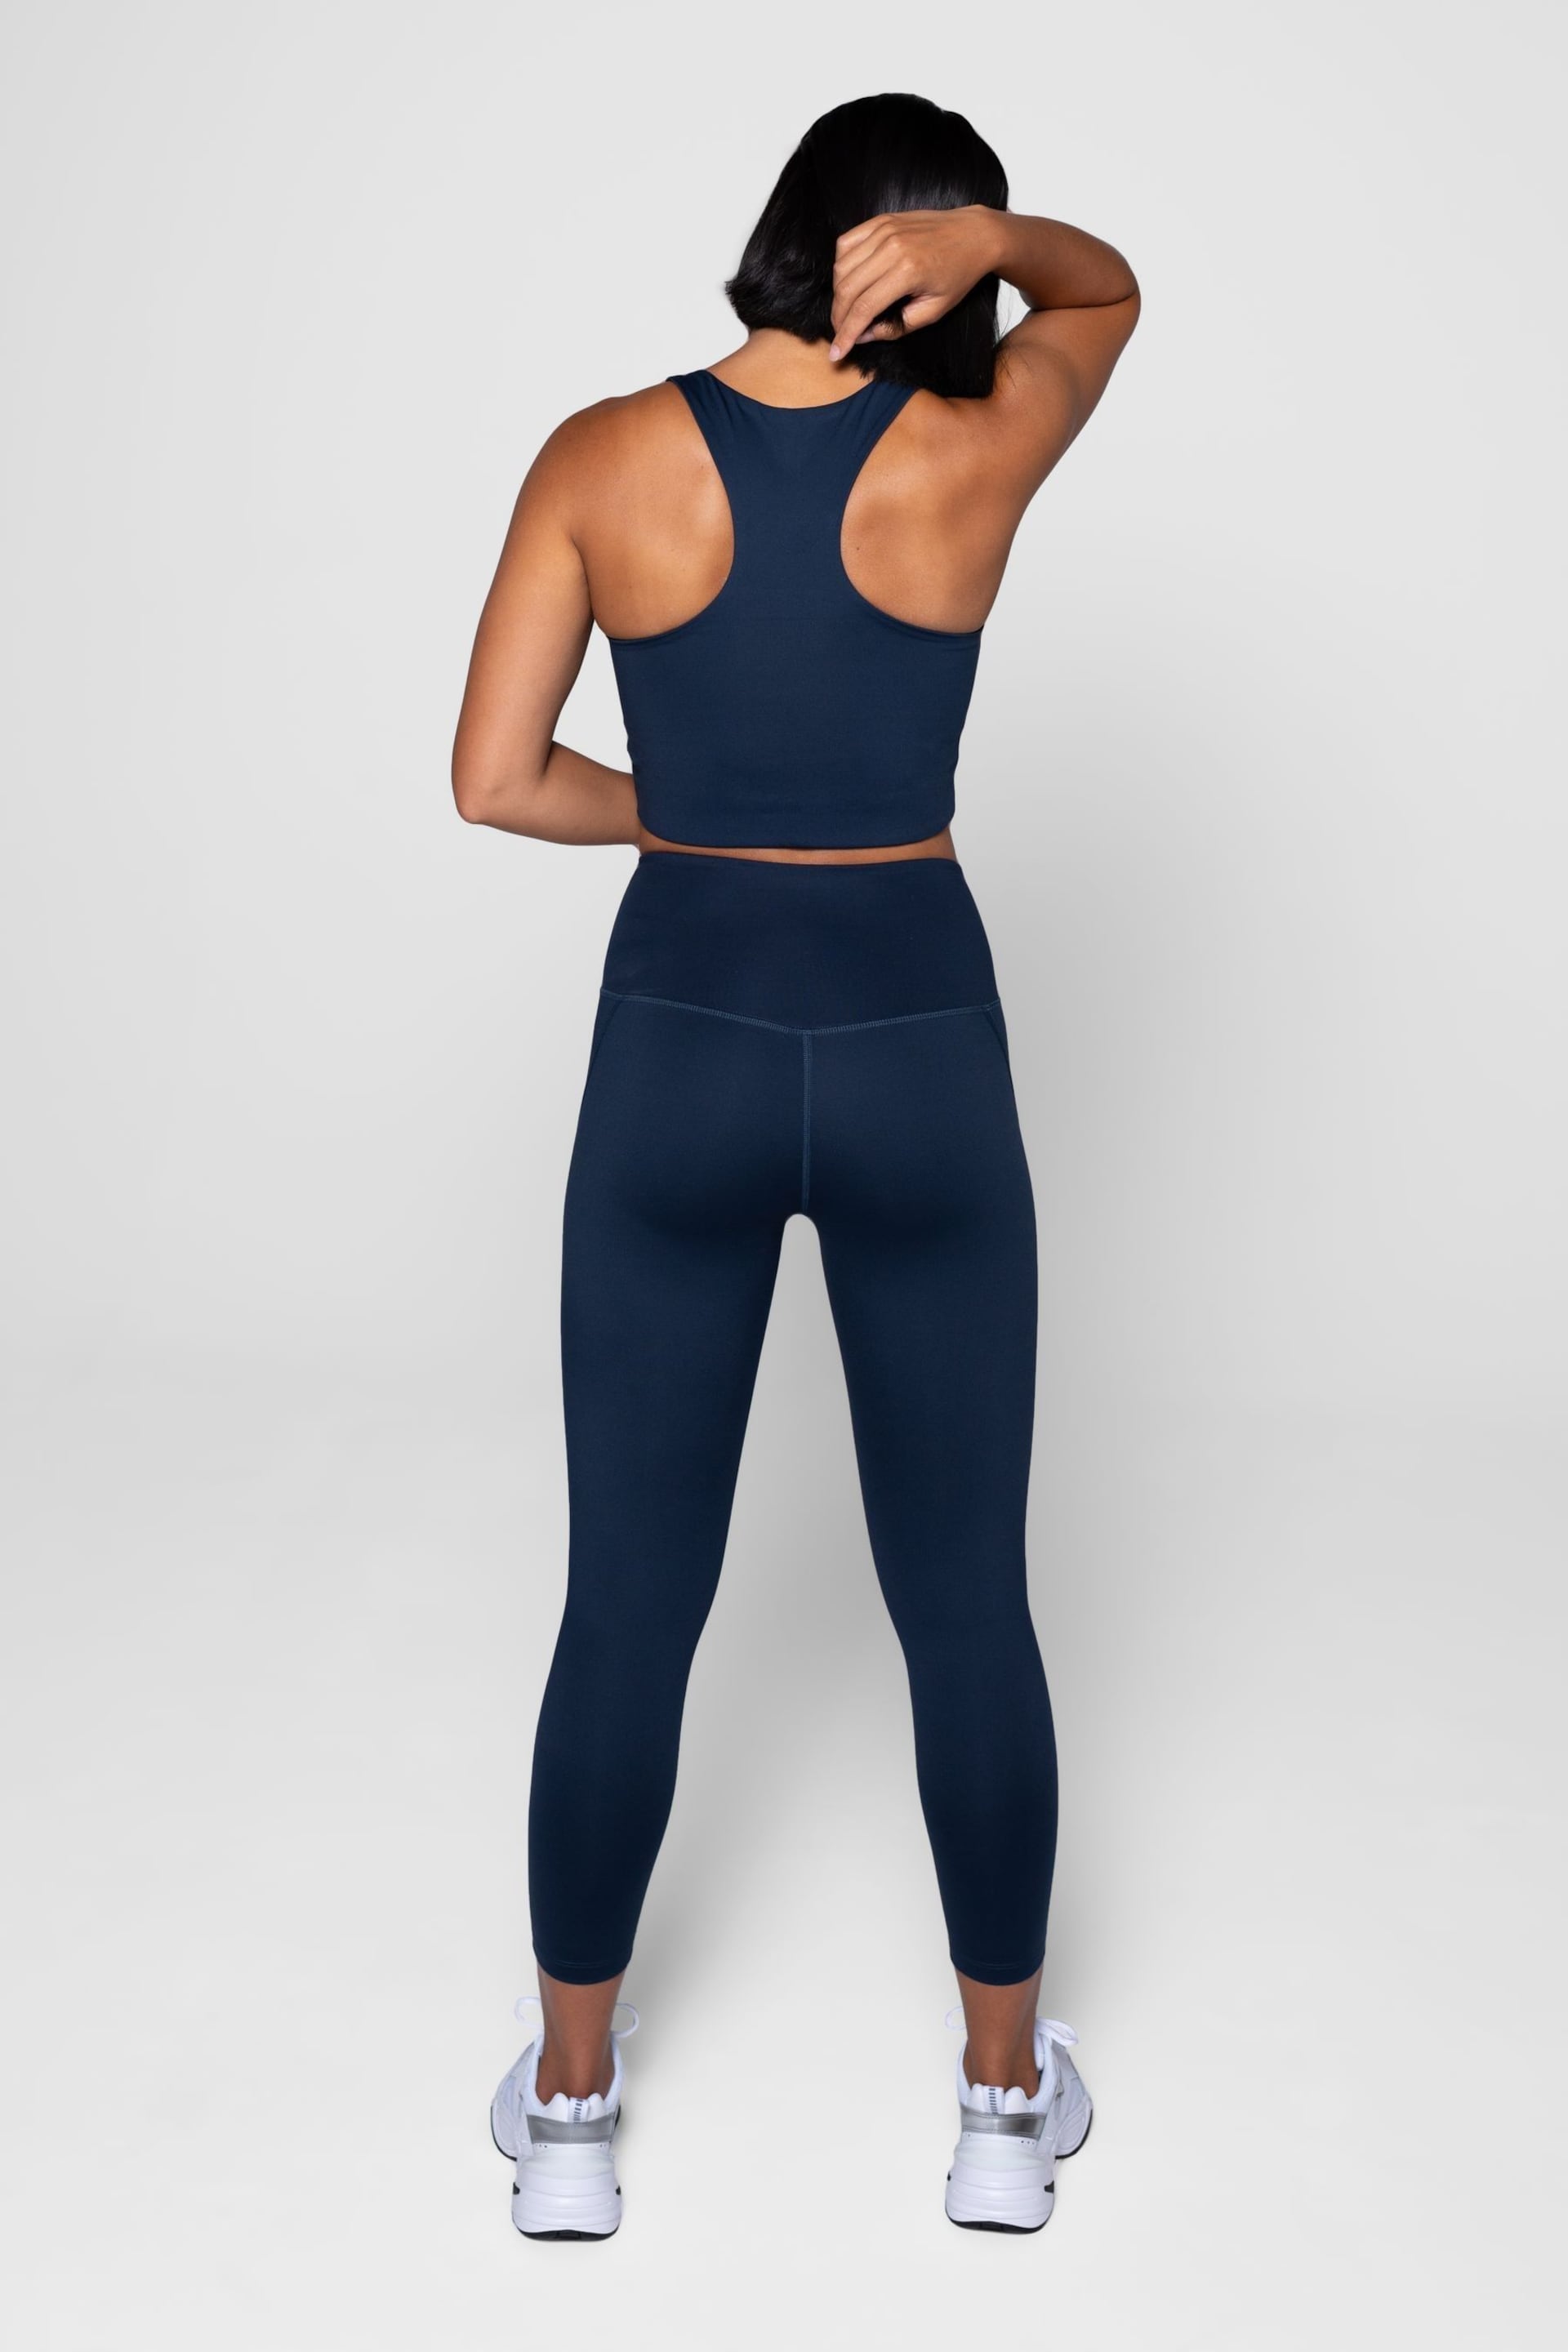 Girlfriend Collective High Rise Compressive Leggings - Image 2 of 9